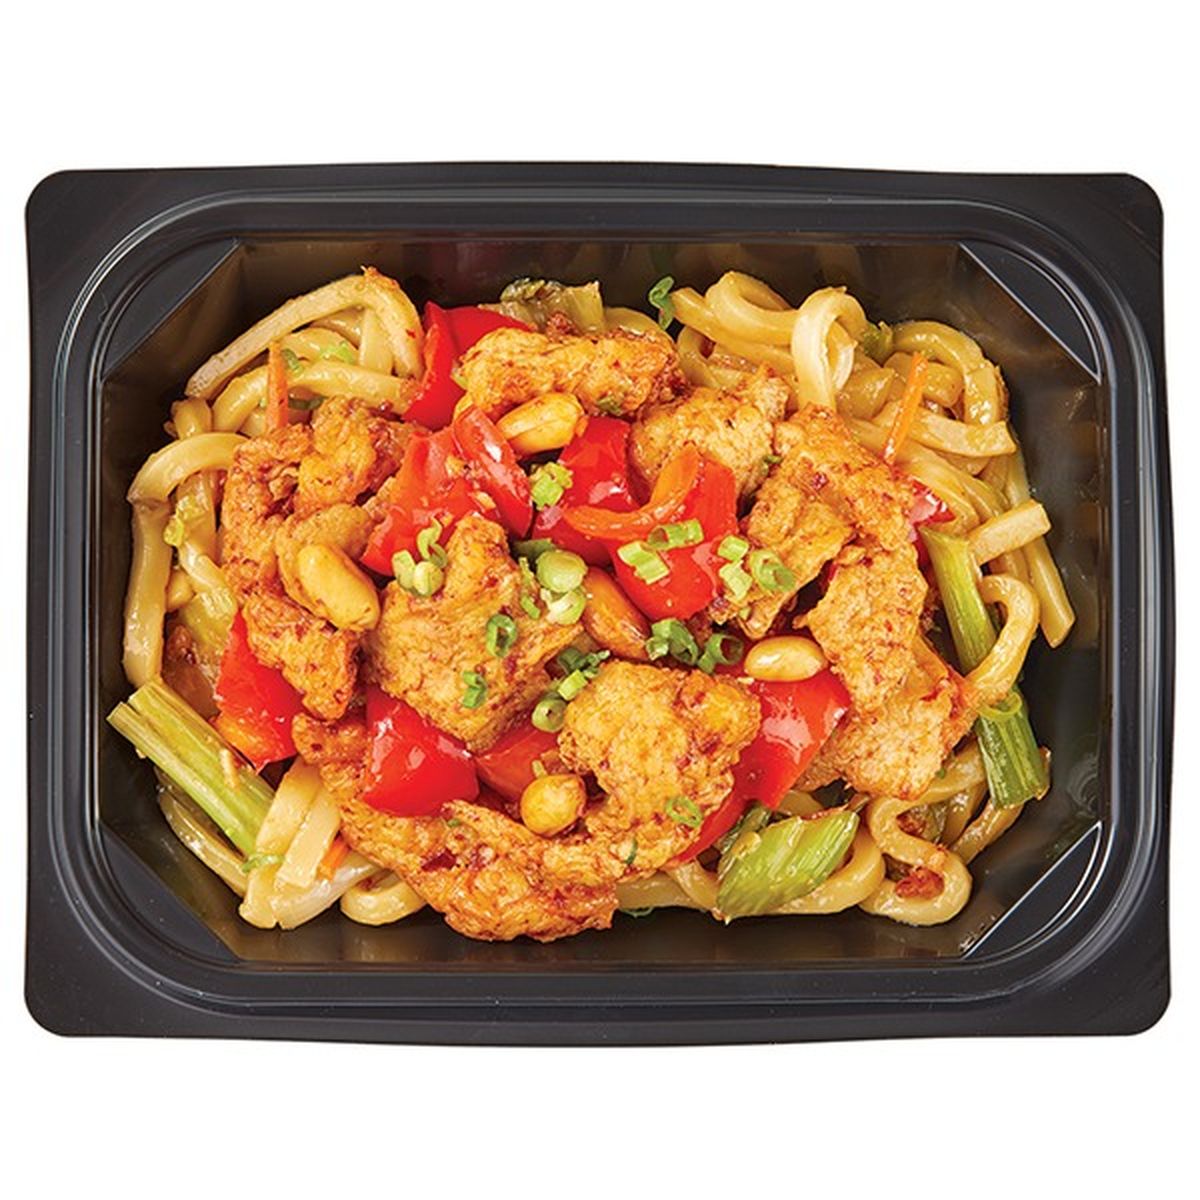 Calories in Wegmans Kung Pao Chicken with Vegetable Udon Noodles